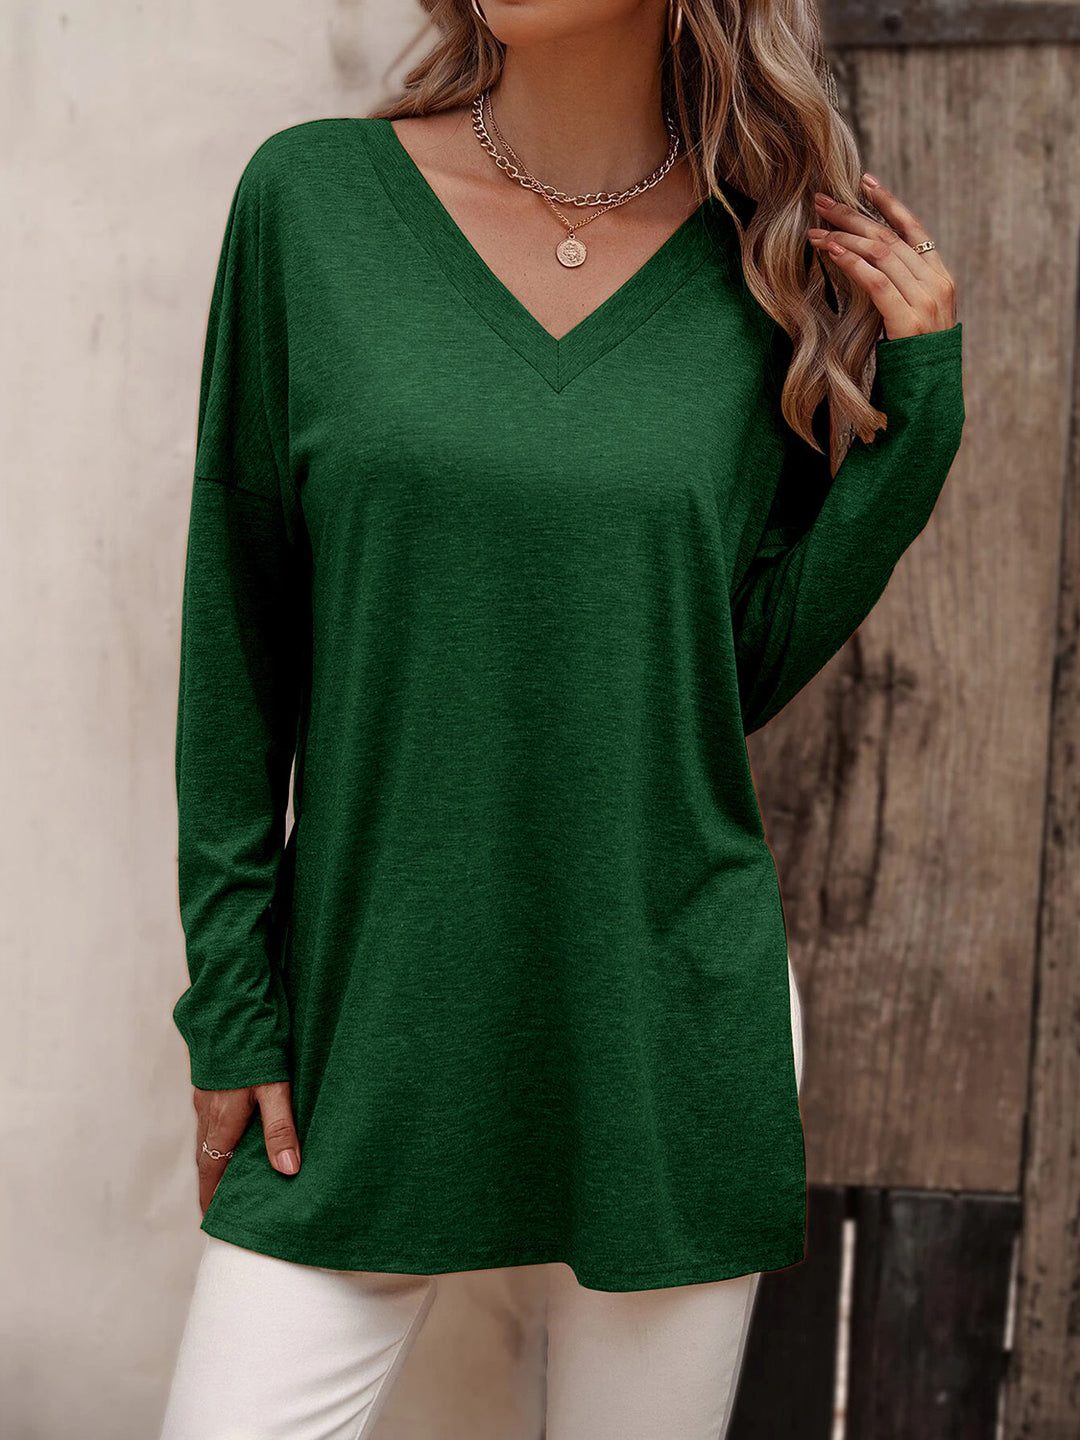 Leaves are Changing Knit Top - Cheeky Chic Boutique